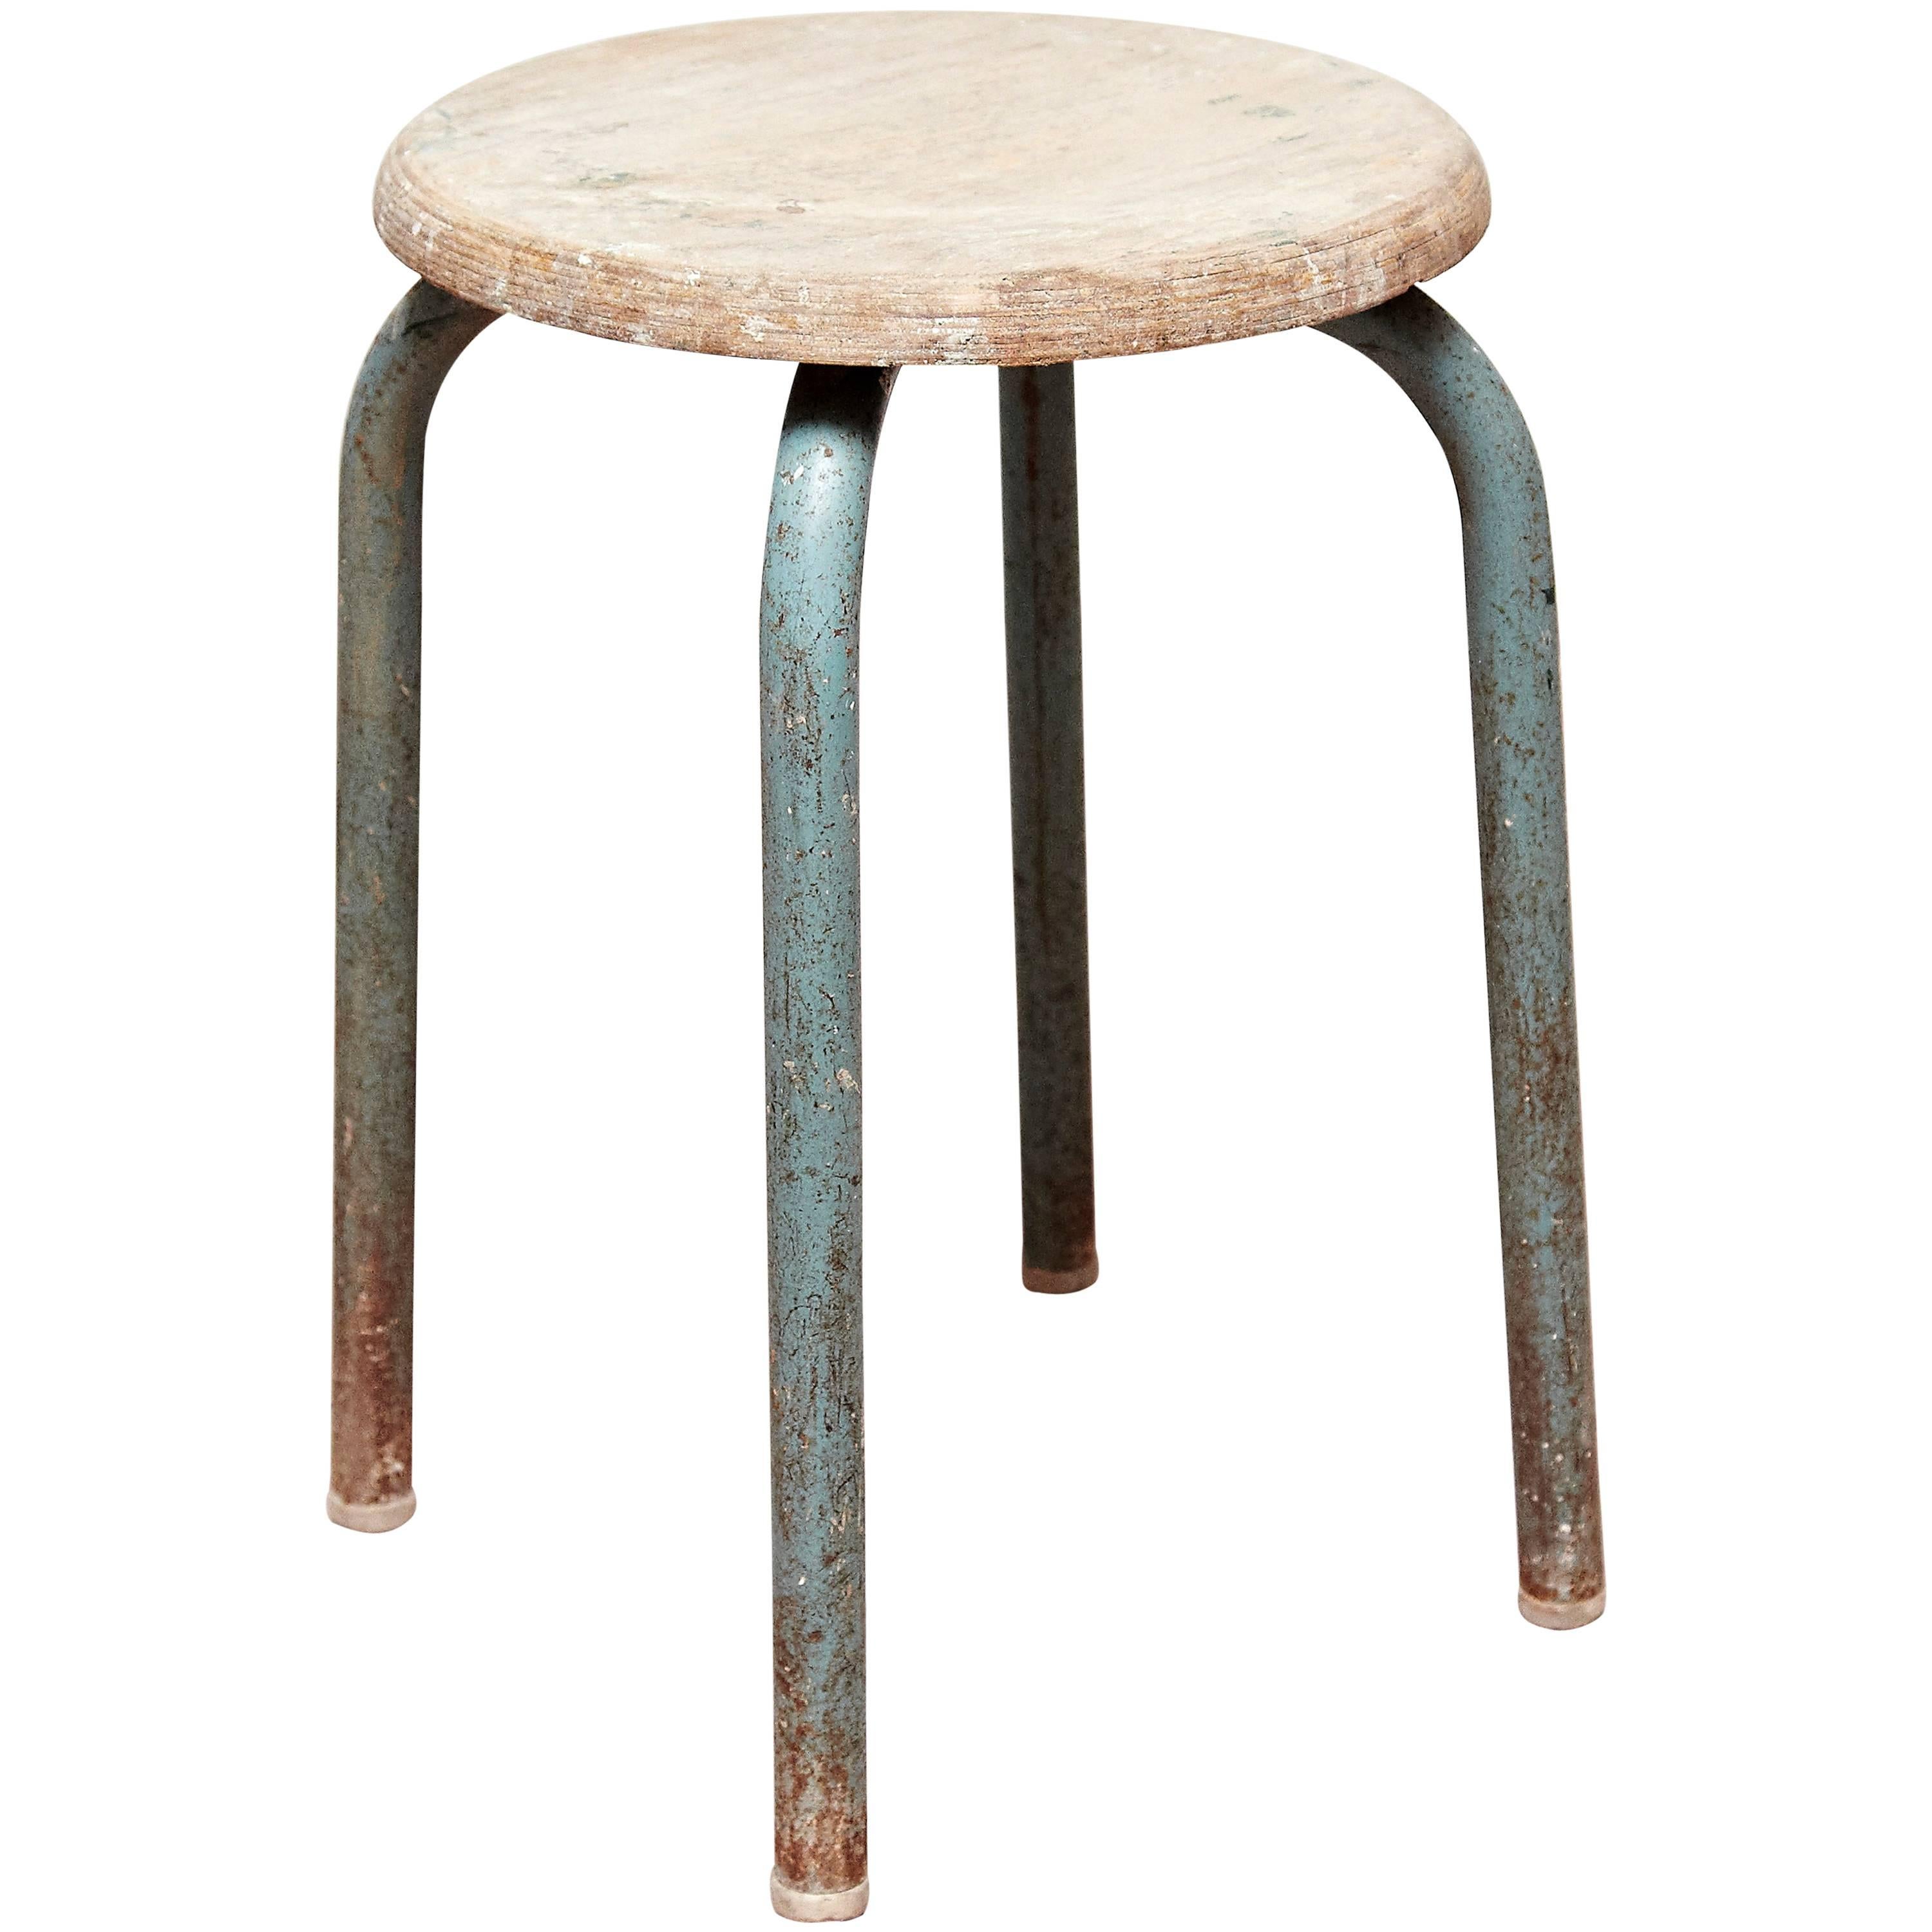 Stool Attributed to Jean Prouvé, circa 1950